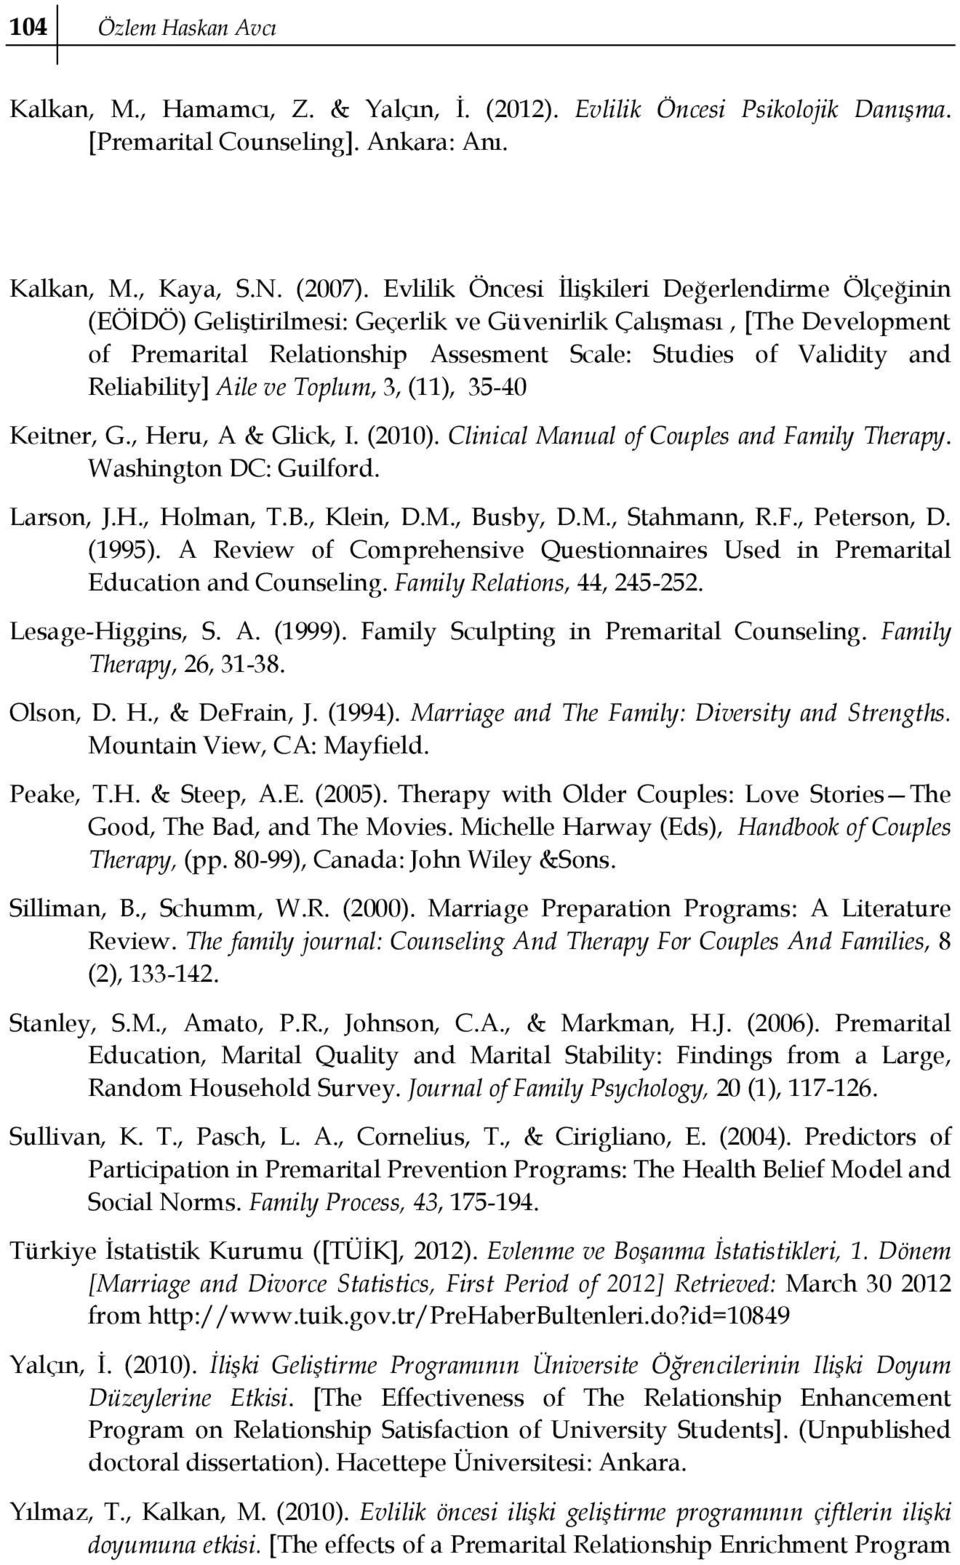 Reliability] Aile ve Toplum, 3, (11), 3-0 Keitner, G., Heru, A & Glick, I. (20). Clinical Manual of Couples and Family Therapy. Washington DC: Guilford. Larson, J.H., Holman, T.B., Klein, D.M., Busby, D.